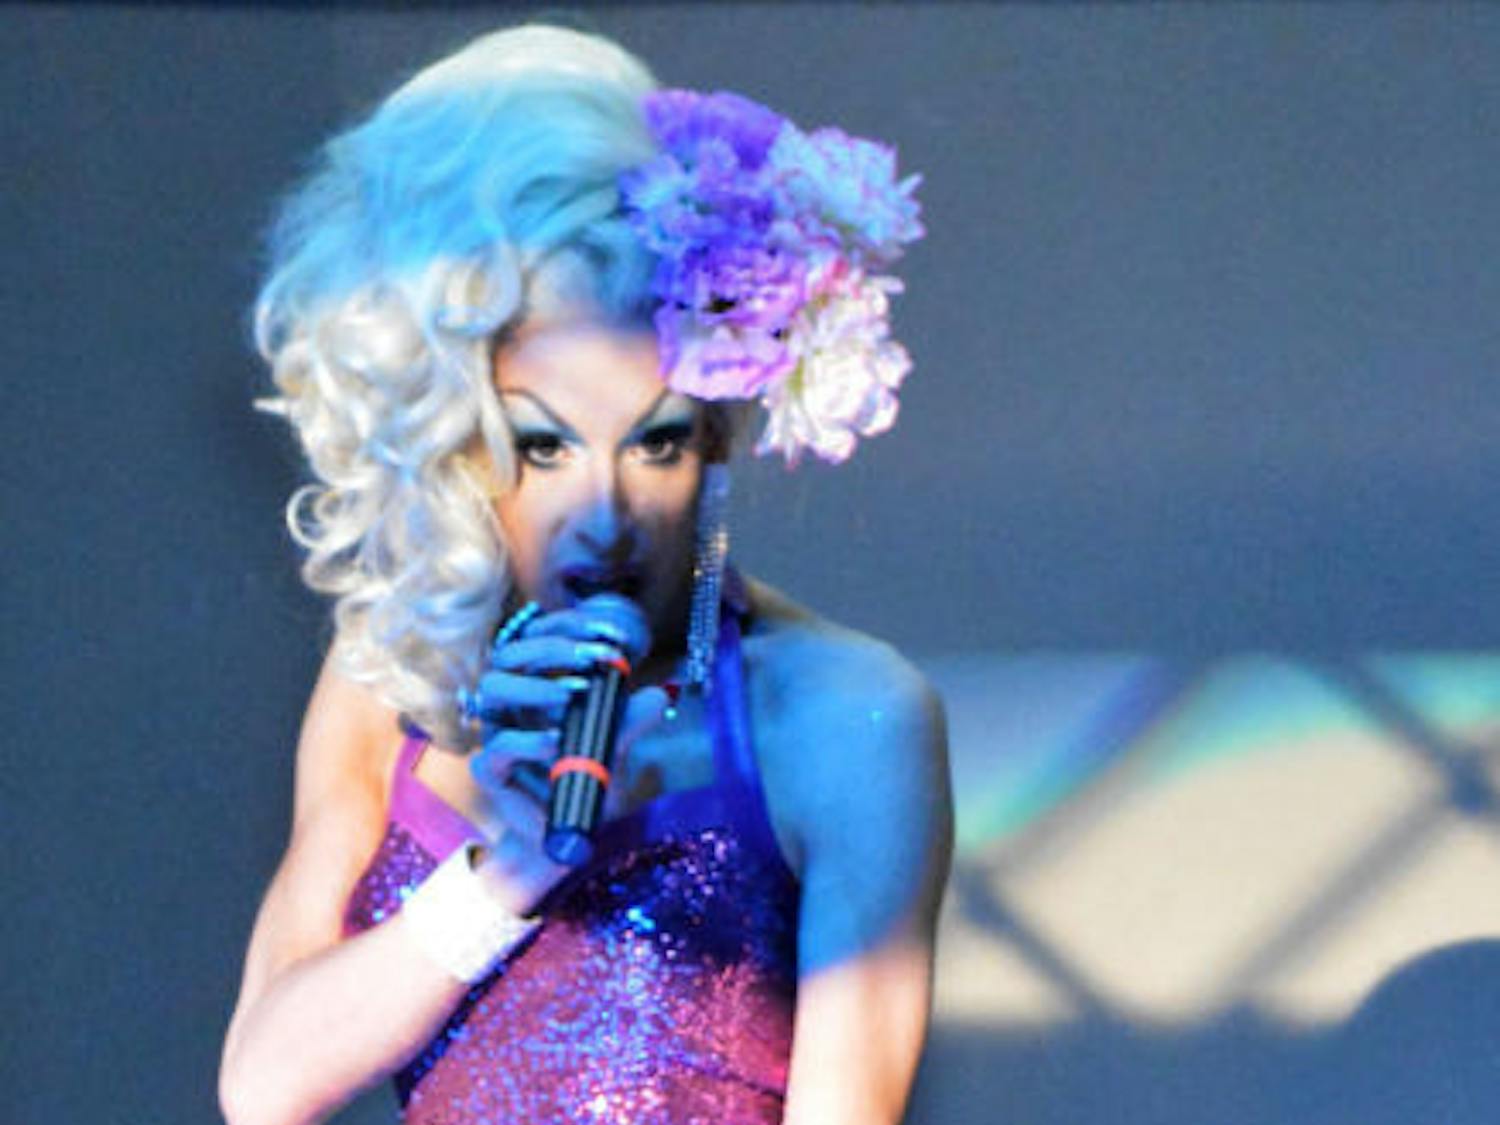 Alaska, from Pittsburgh, performs Thursday in the Reitz Union Grand Ballroom as part of Pride Awareness Month.